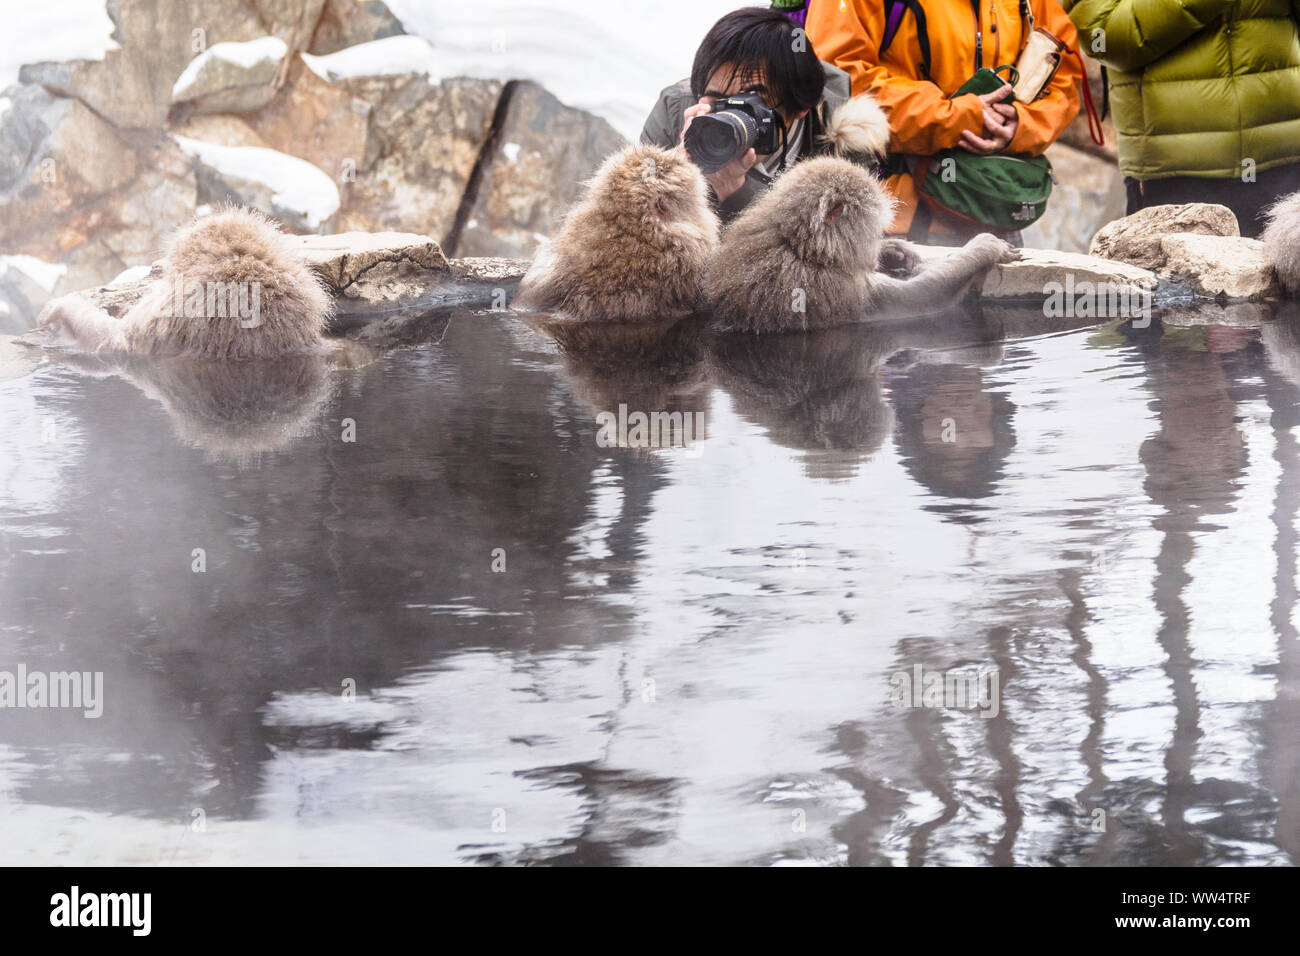 A photographer takes picture of bating Snow Monkeys (Japanese macaque) up close by the edge of hot spring pool at Snow Monkey Park, Nagano, Japan. Stock Photo